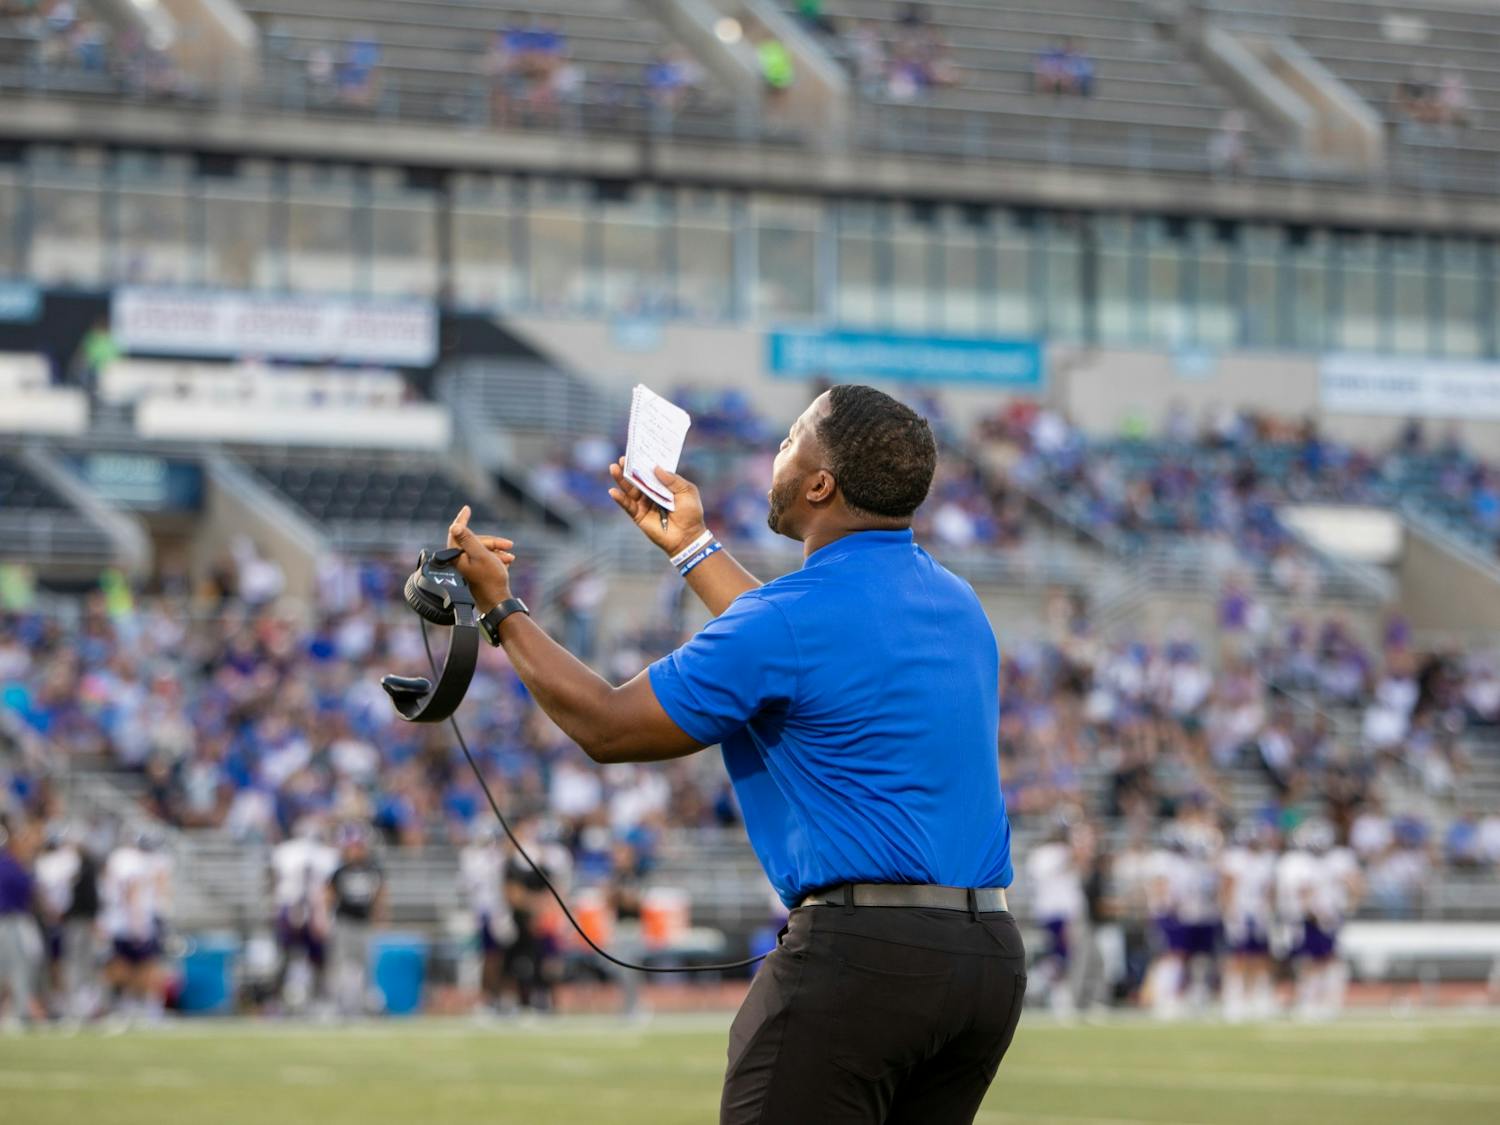 The UB football team announced its new coaching hires last week.